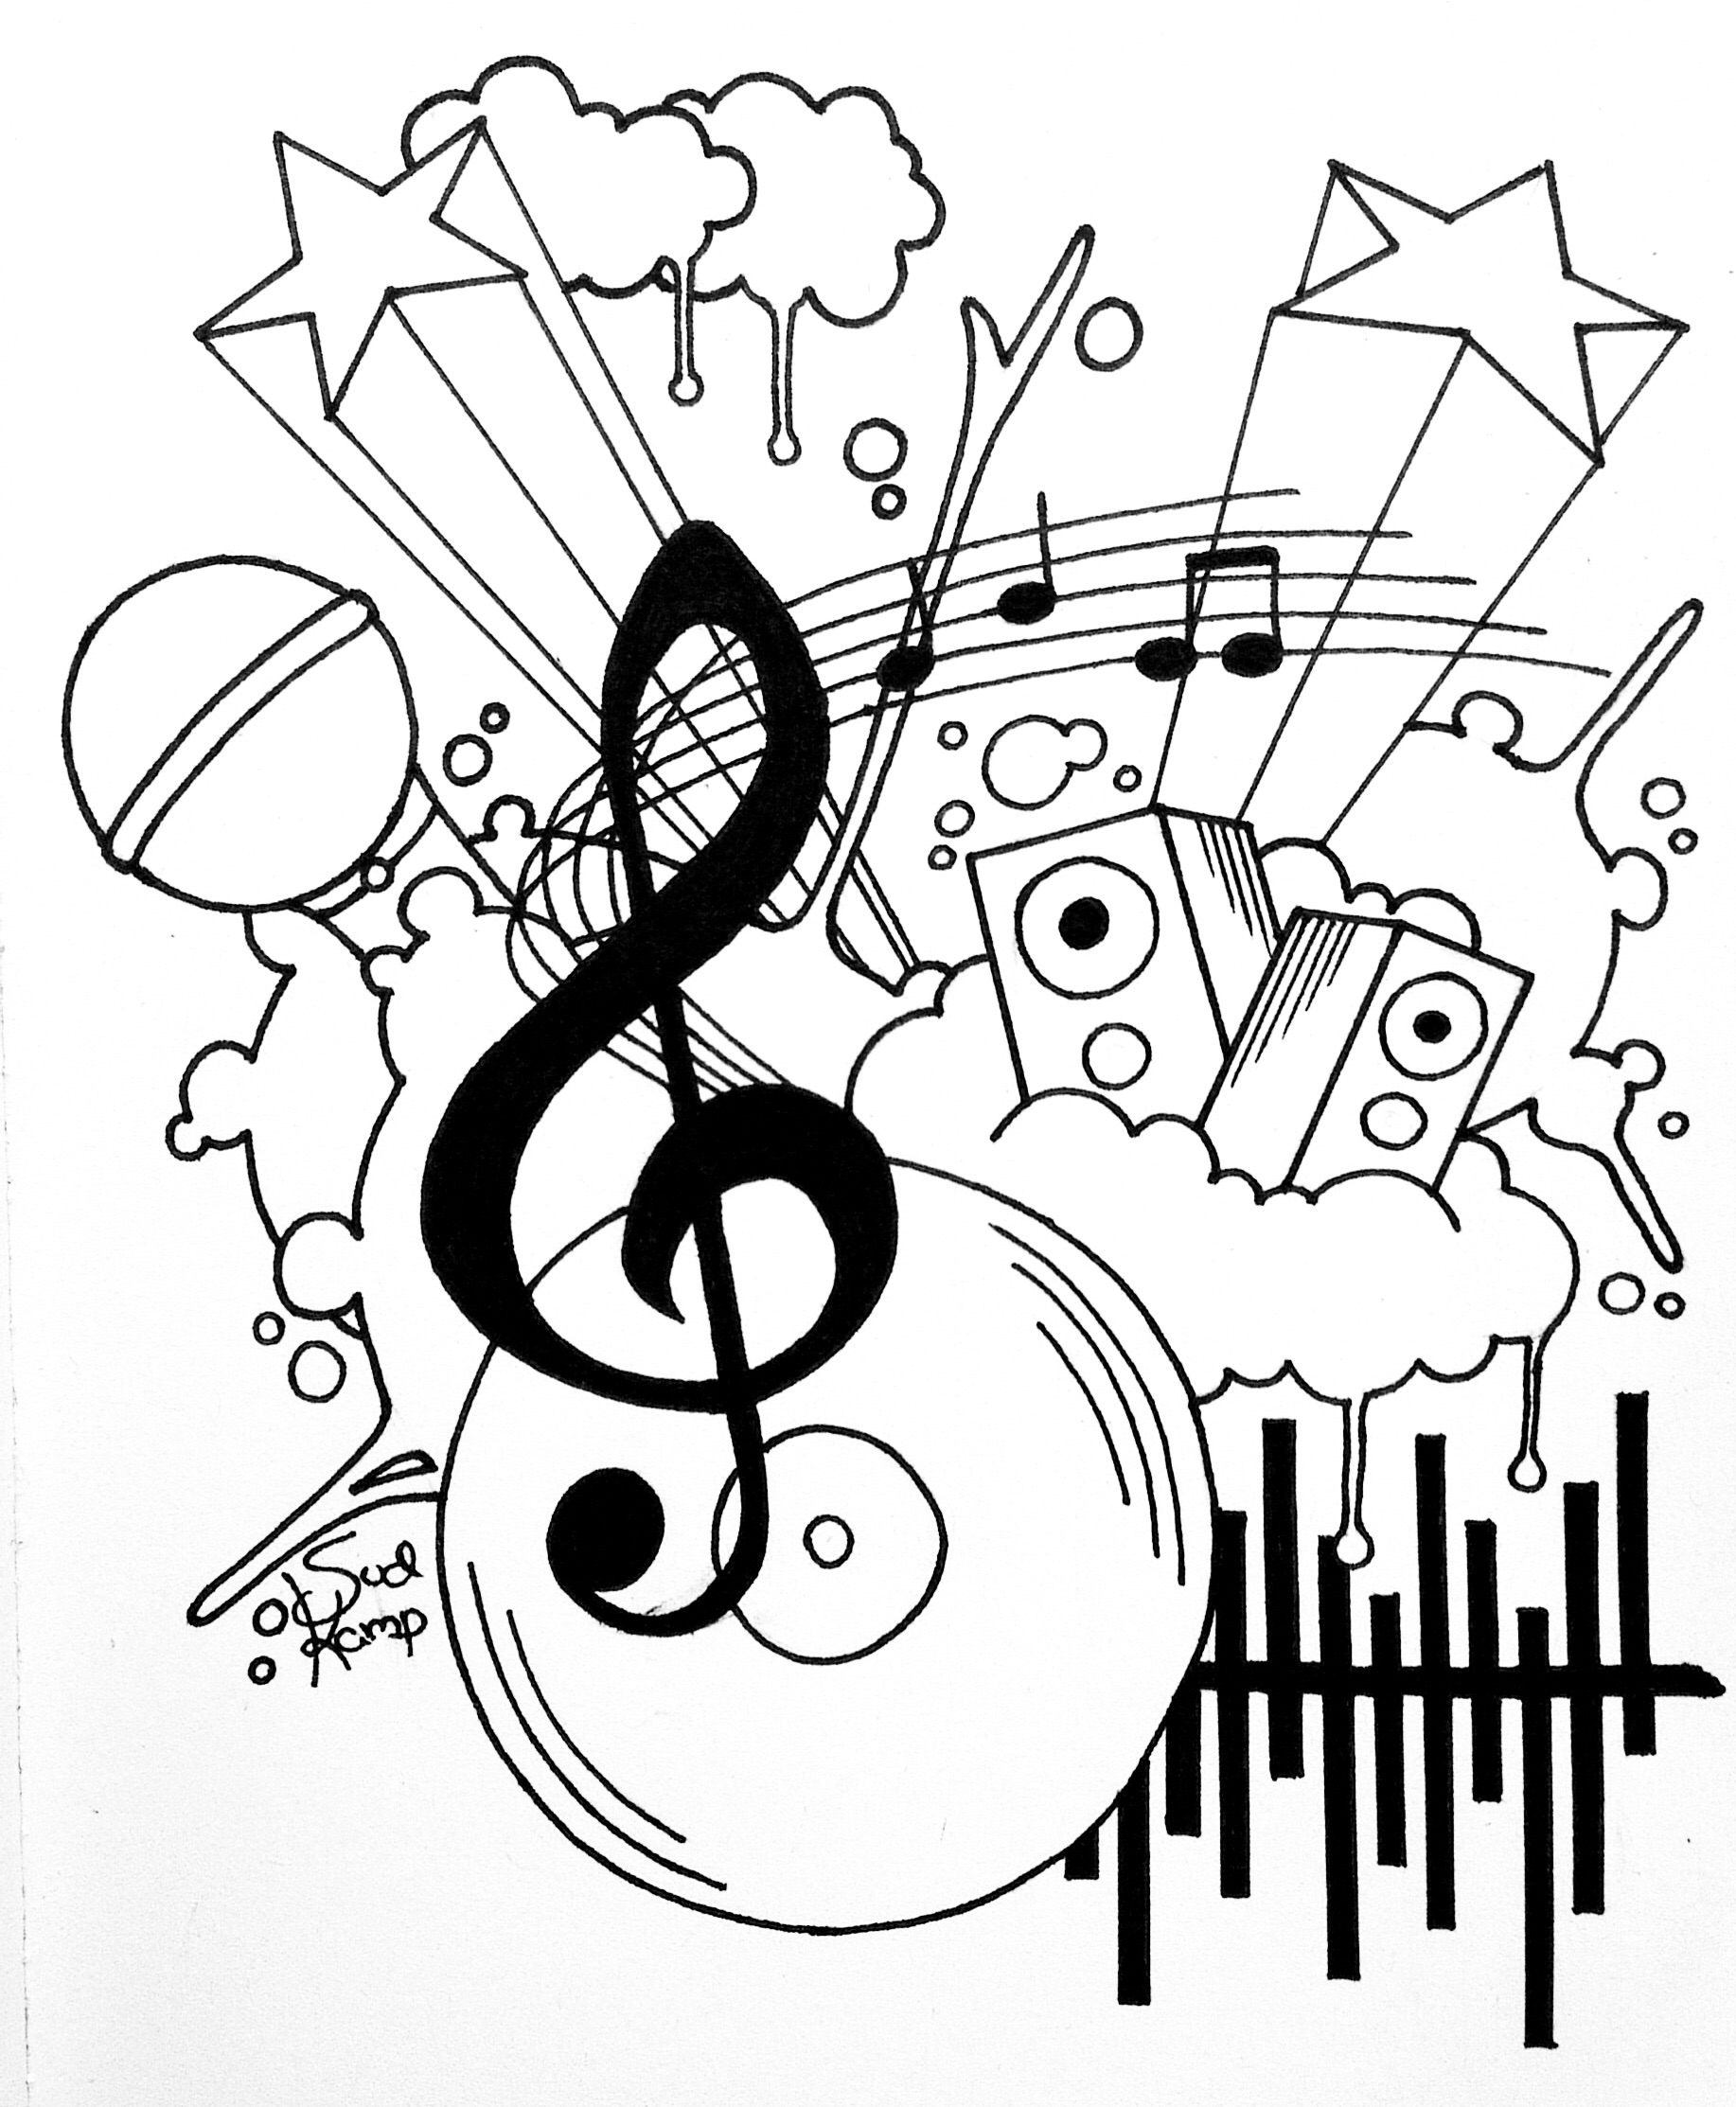 Music Notes Doodle Drawings